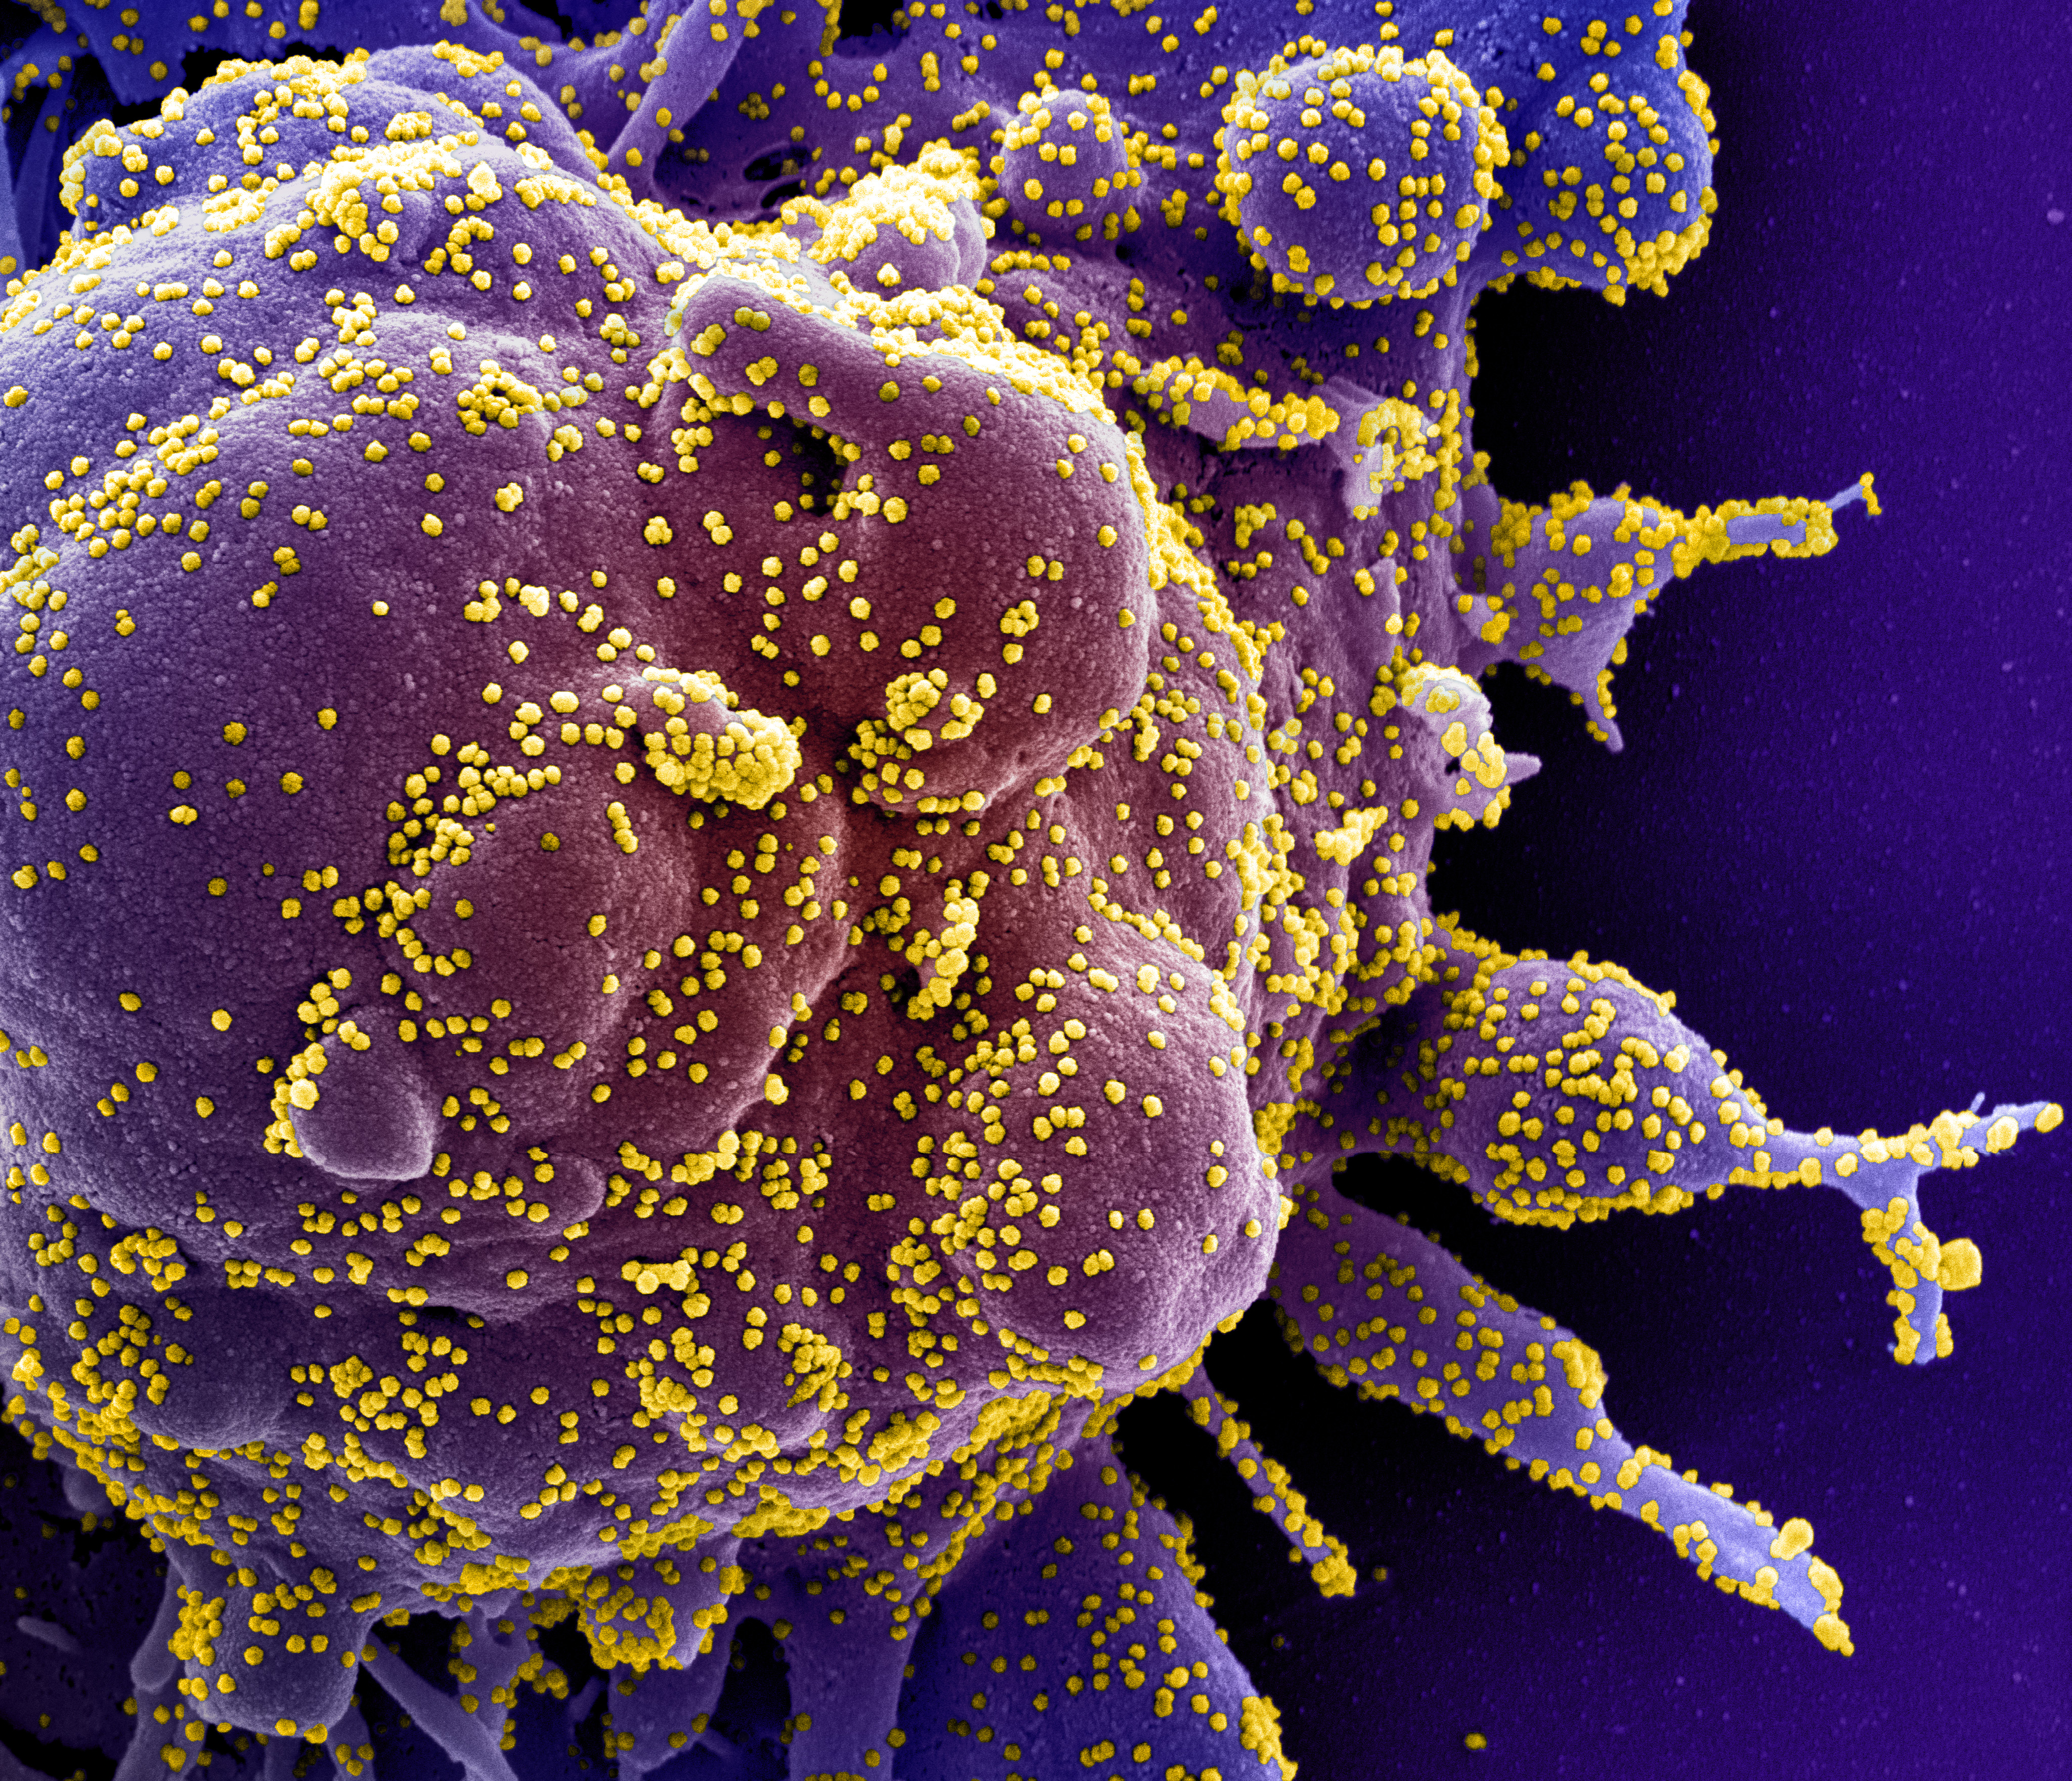 Colorized scanning electron micrograph of a cell (purple) infected with SARS-COV-2 virus particles